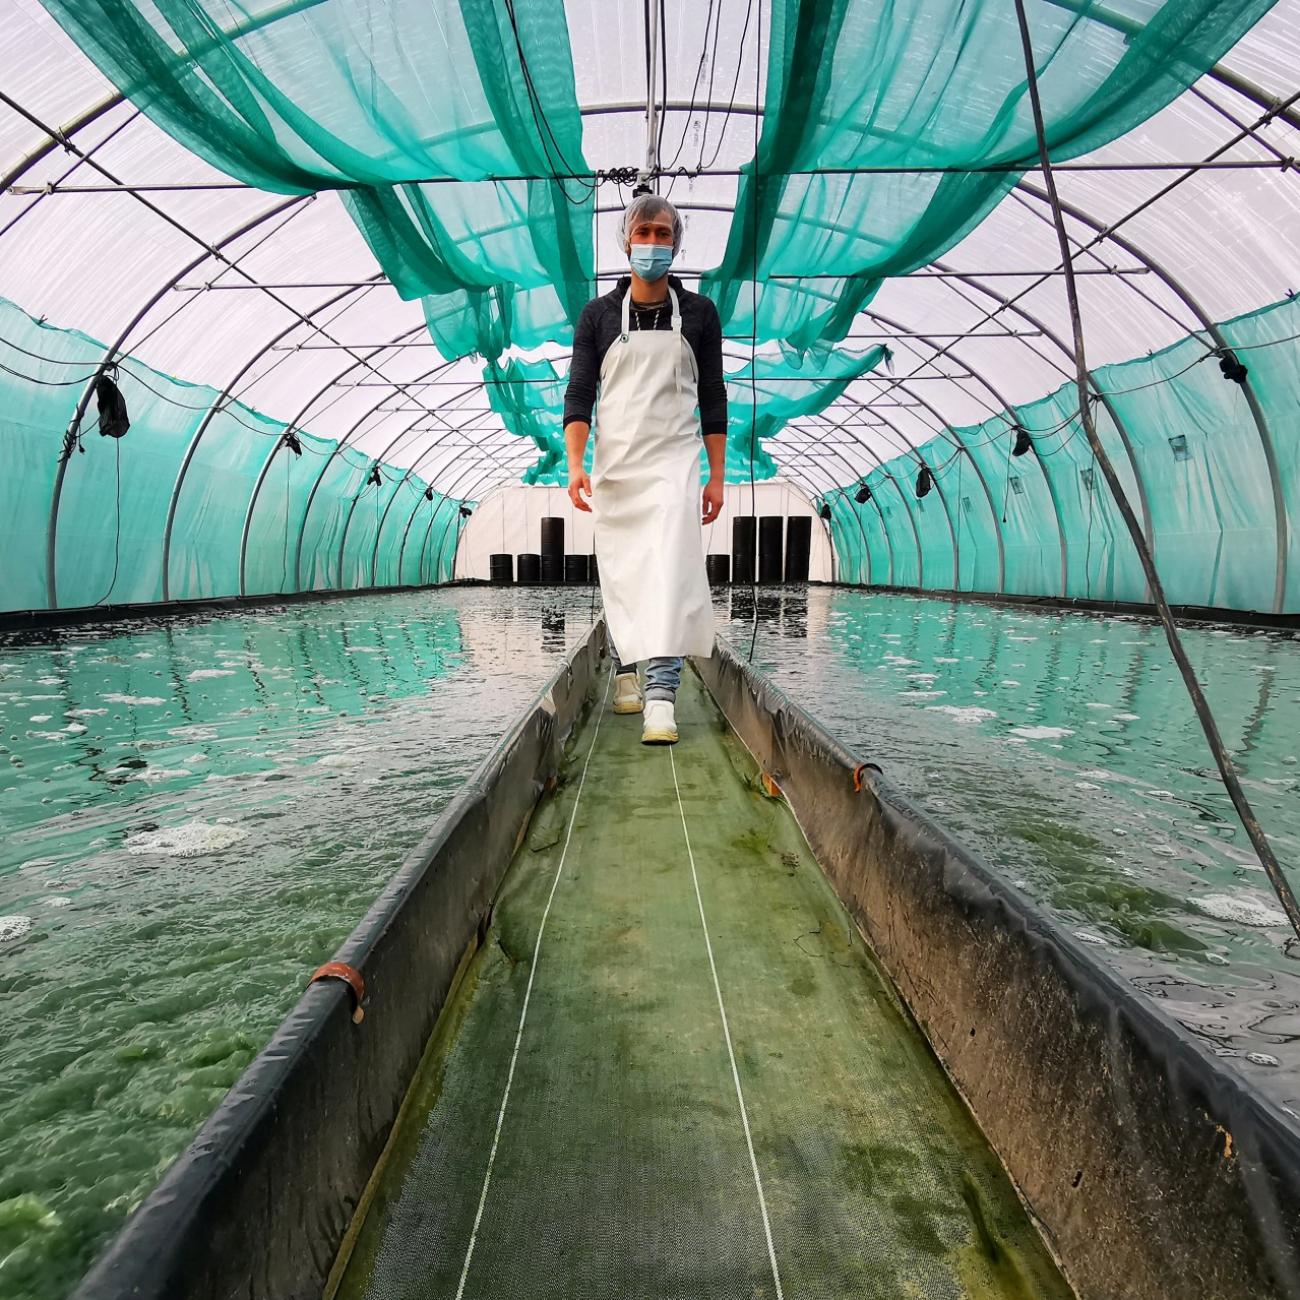 A man walks between two large basins full of seaweed used for spirulina production